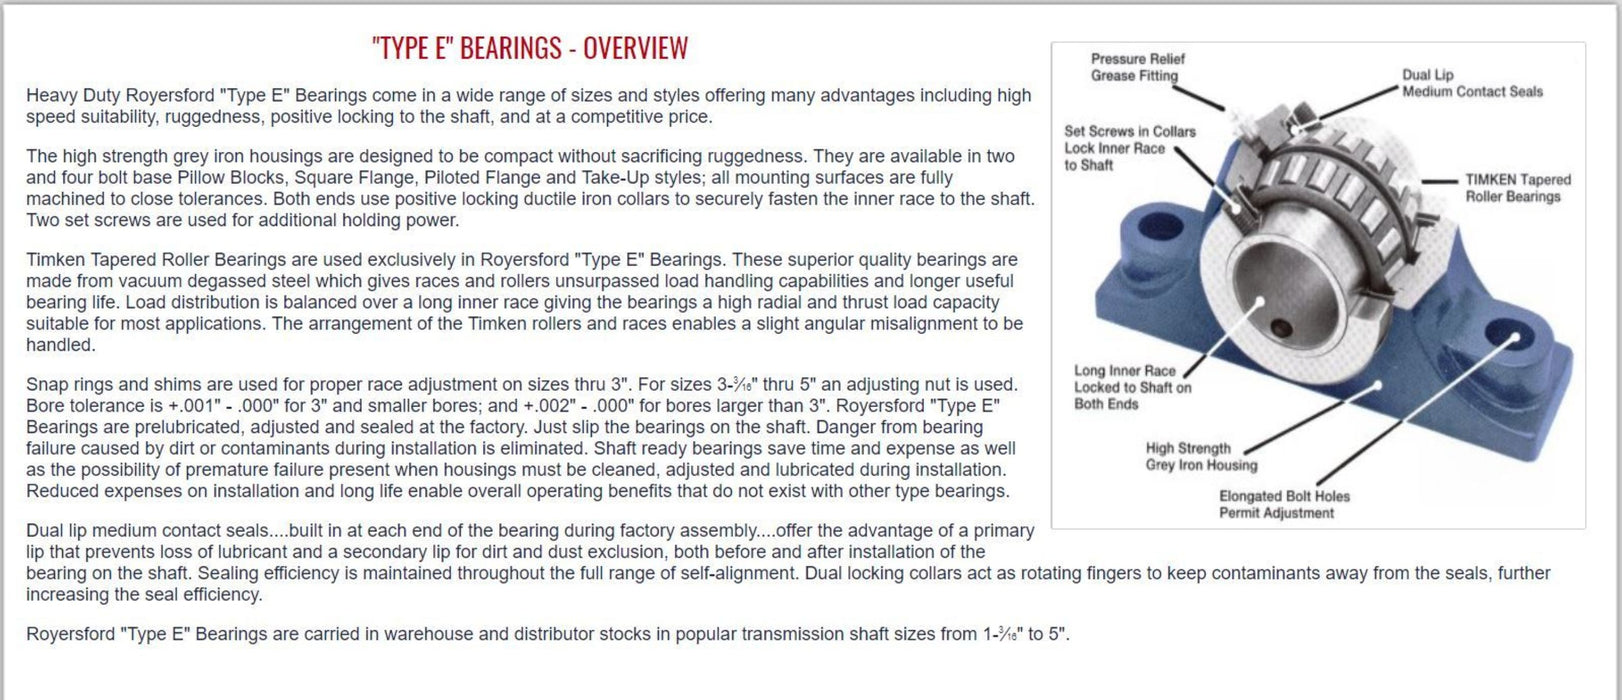 20-04-0212, Royersford Type E 4-Bolt Pillow Block Bearing, 2-3/4 with Timken Tapered Roller Bearings